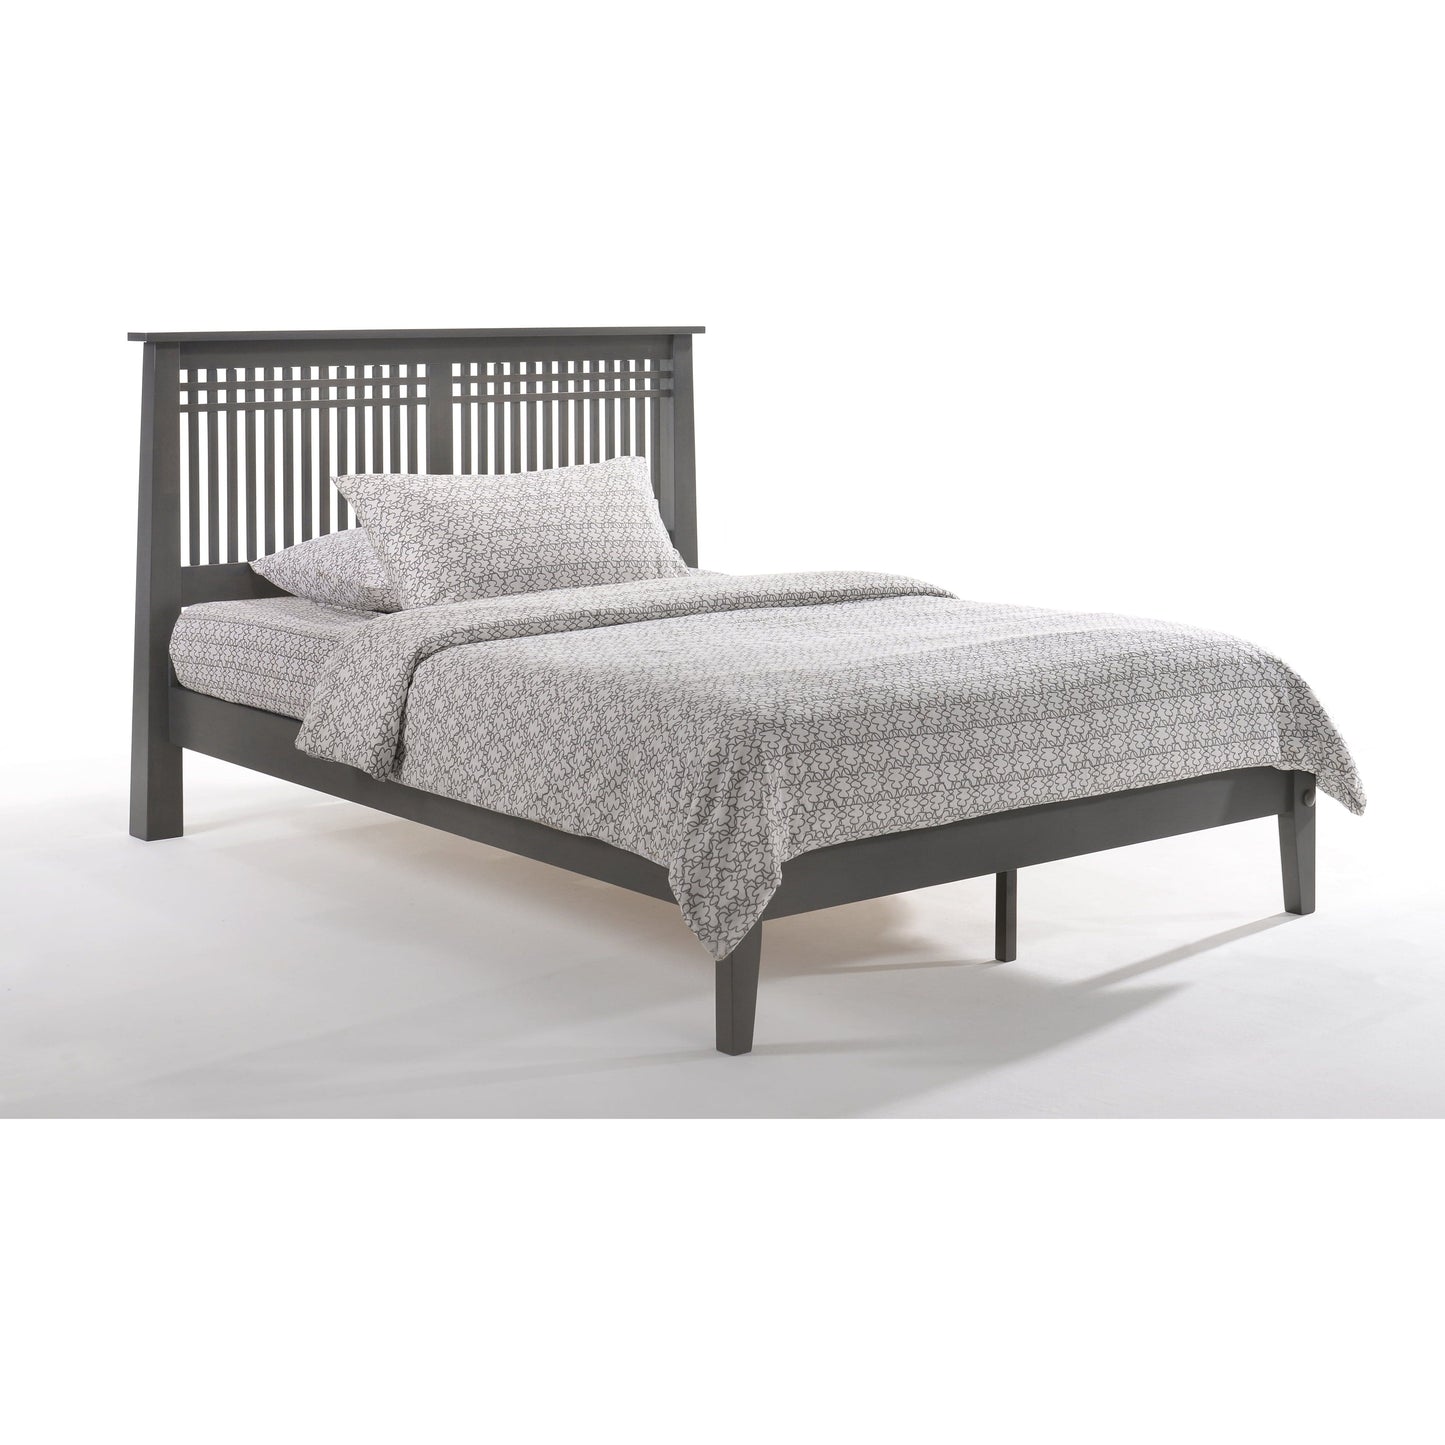 Night And Day Queen Solstice Bed in cherry finish (P Series)